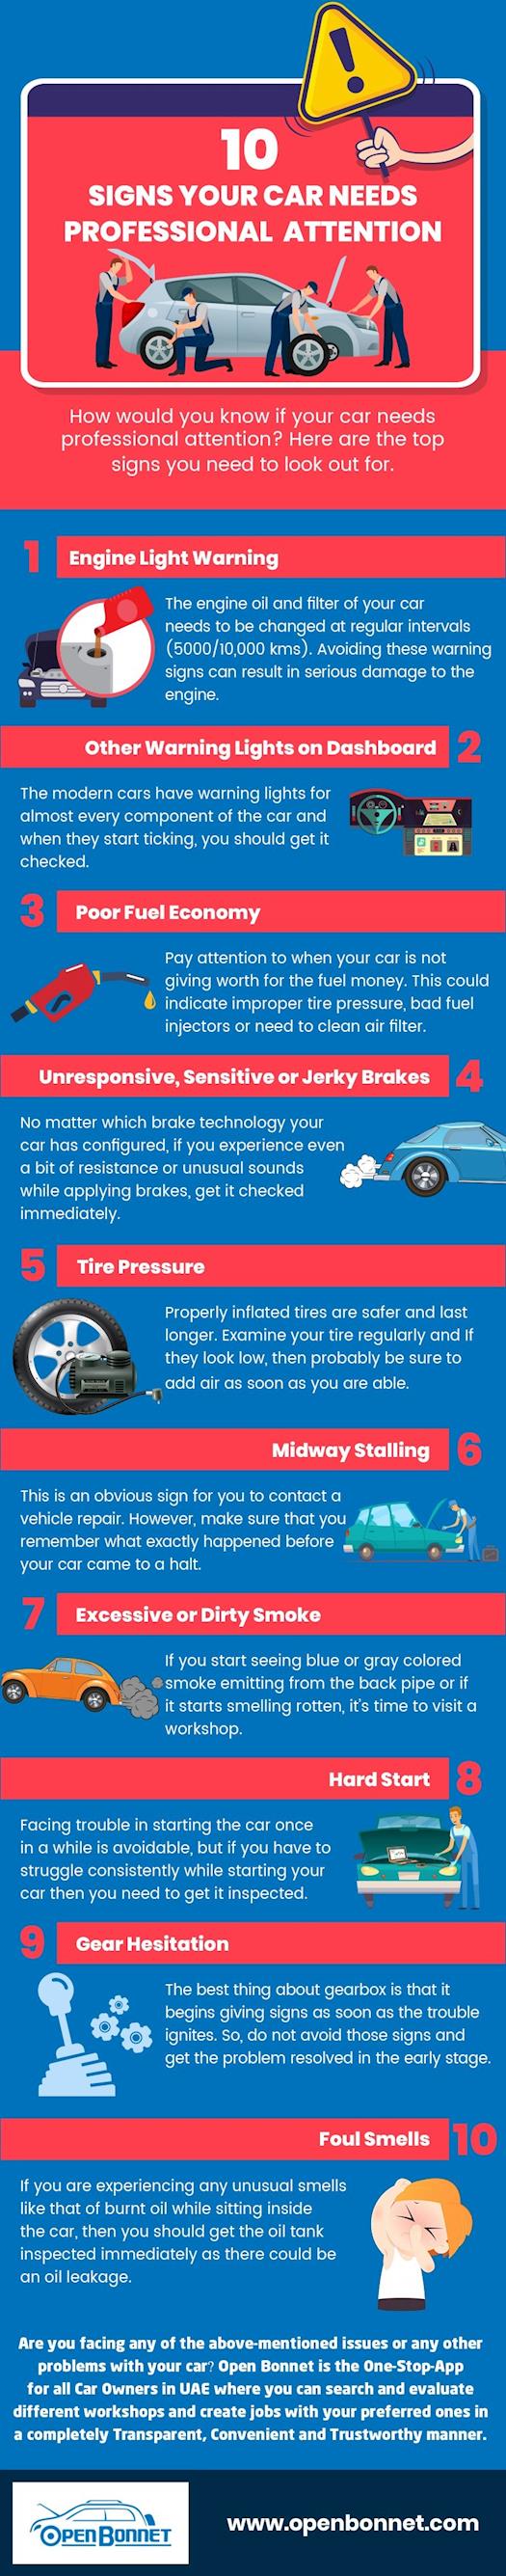 10 Signs Your Car Needs Professional Attention